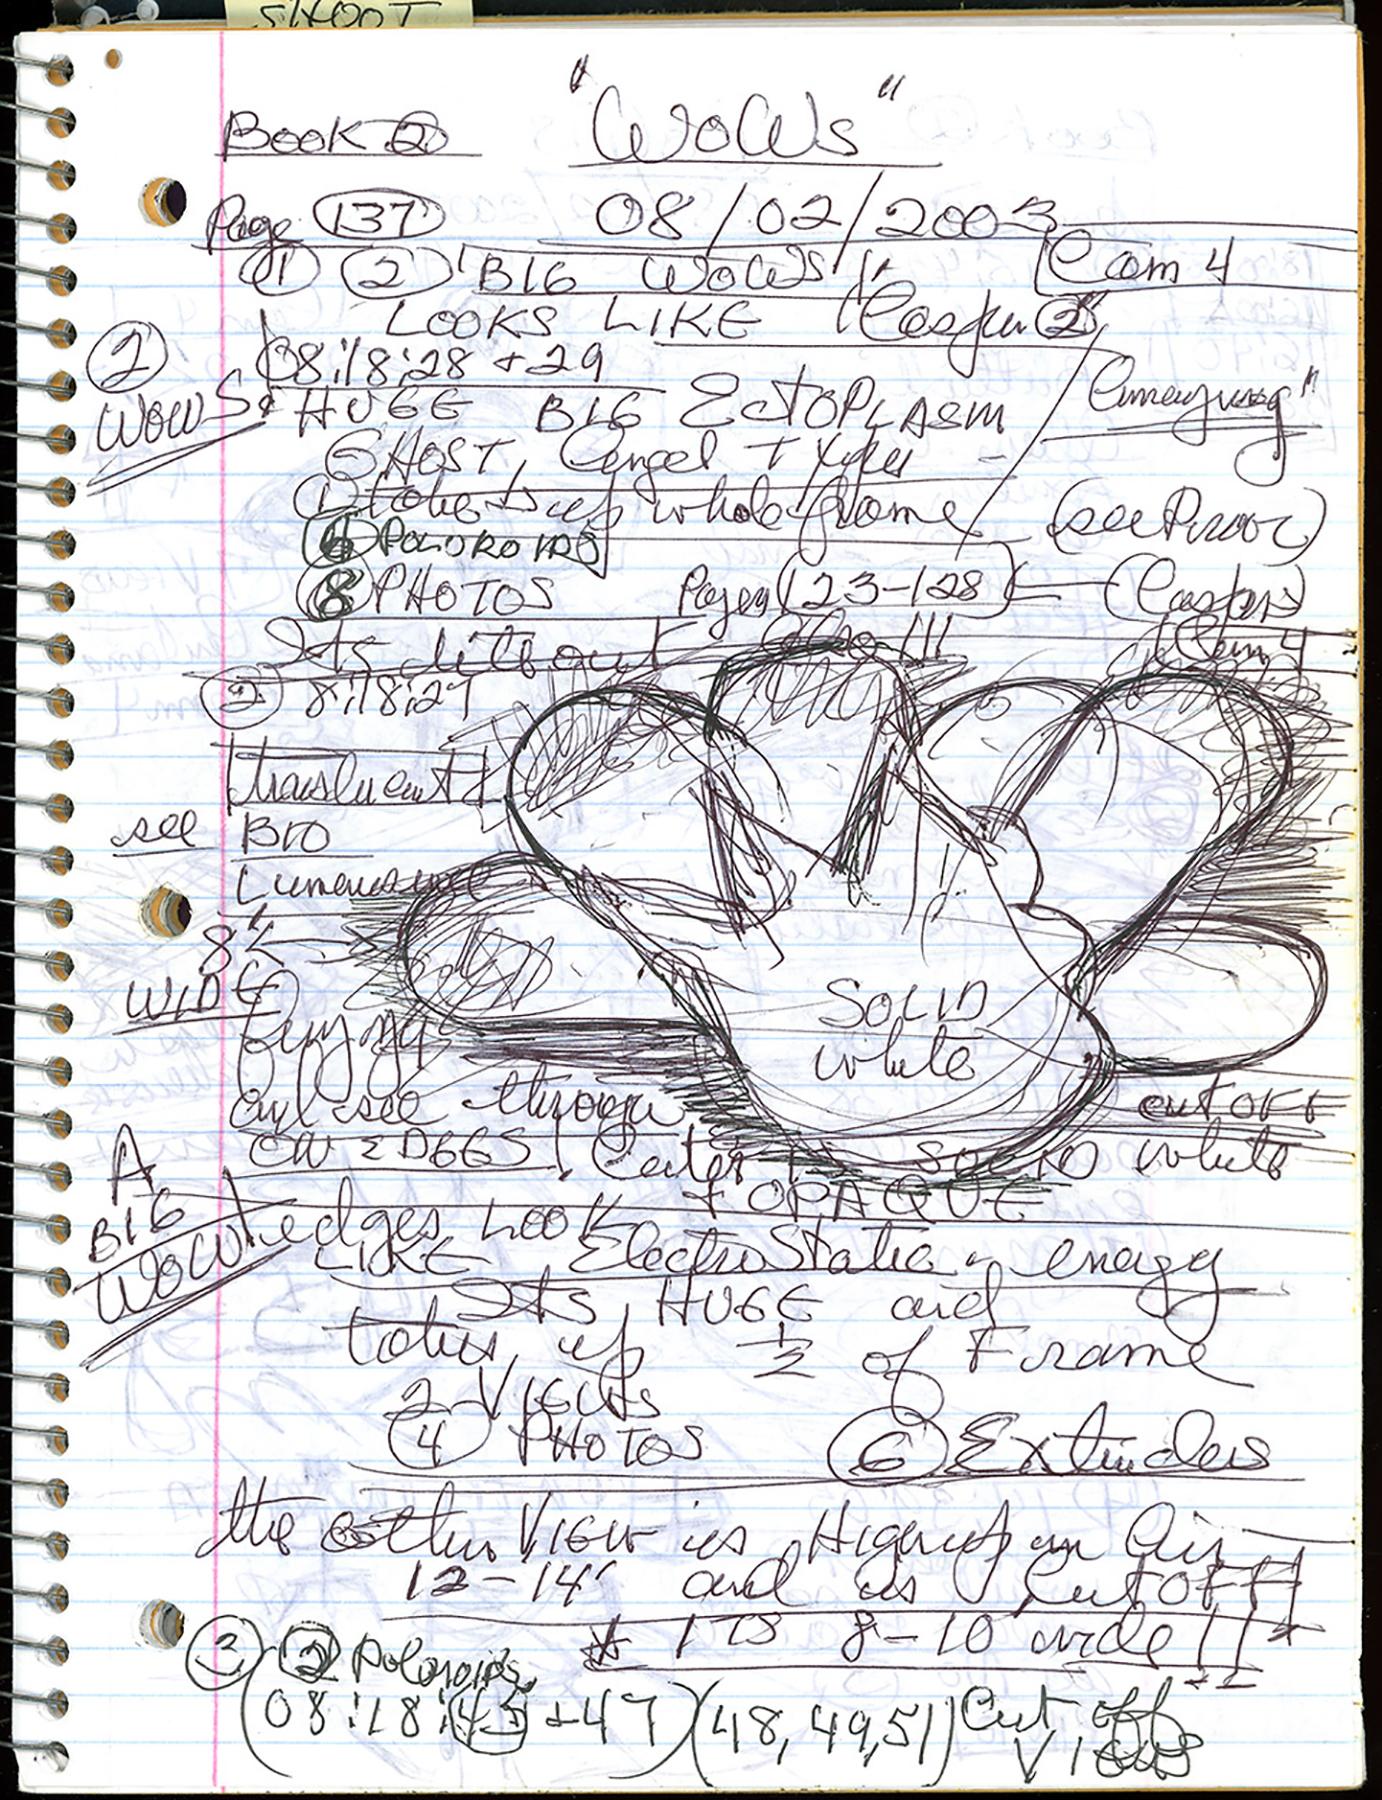 "WOWs", UFO Notebook, August 2 - Photograph by Kali